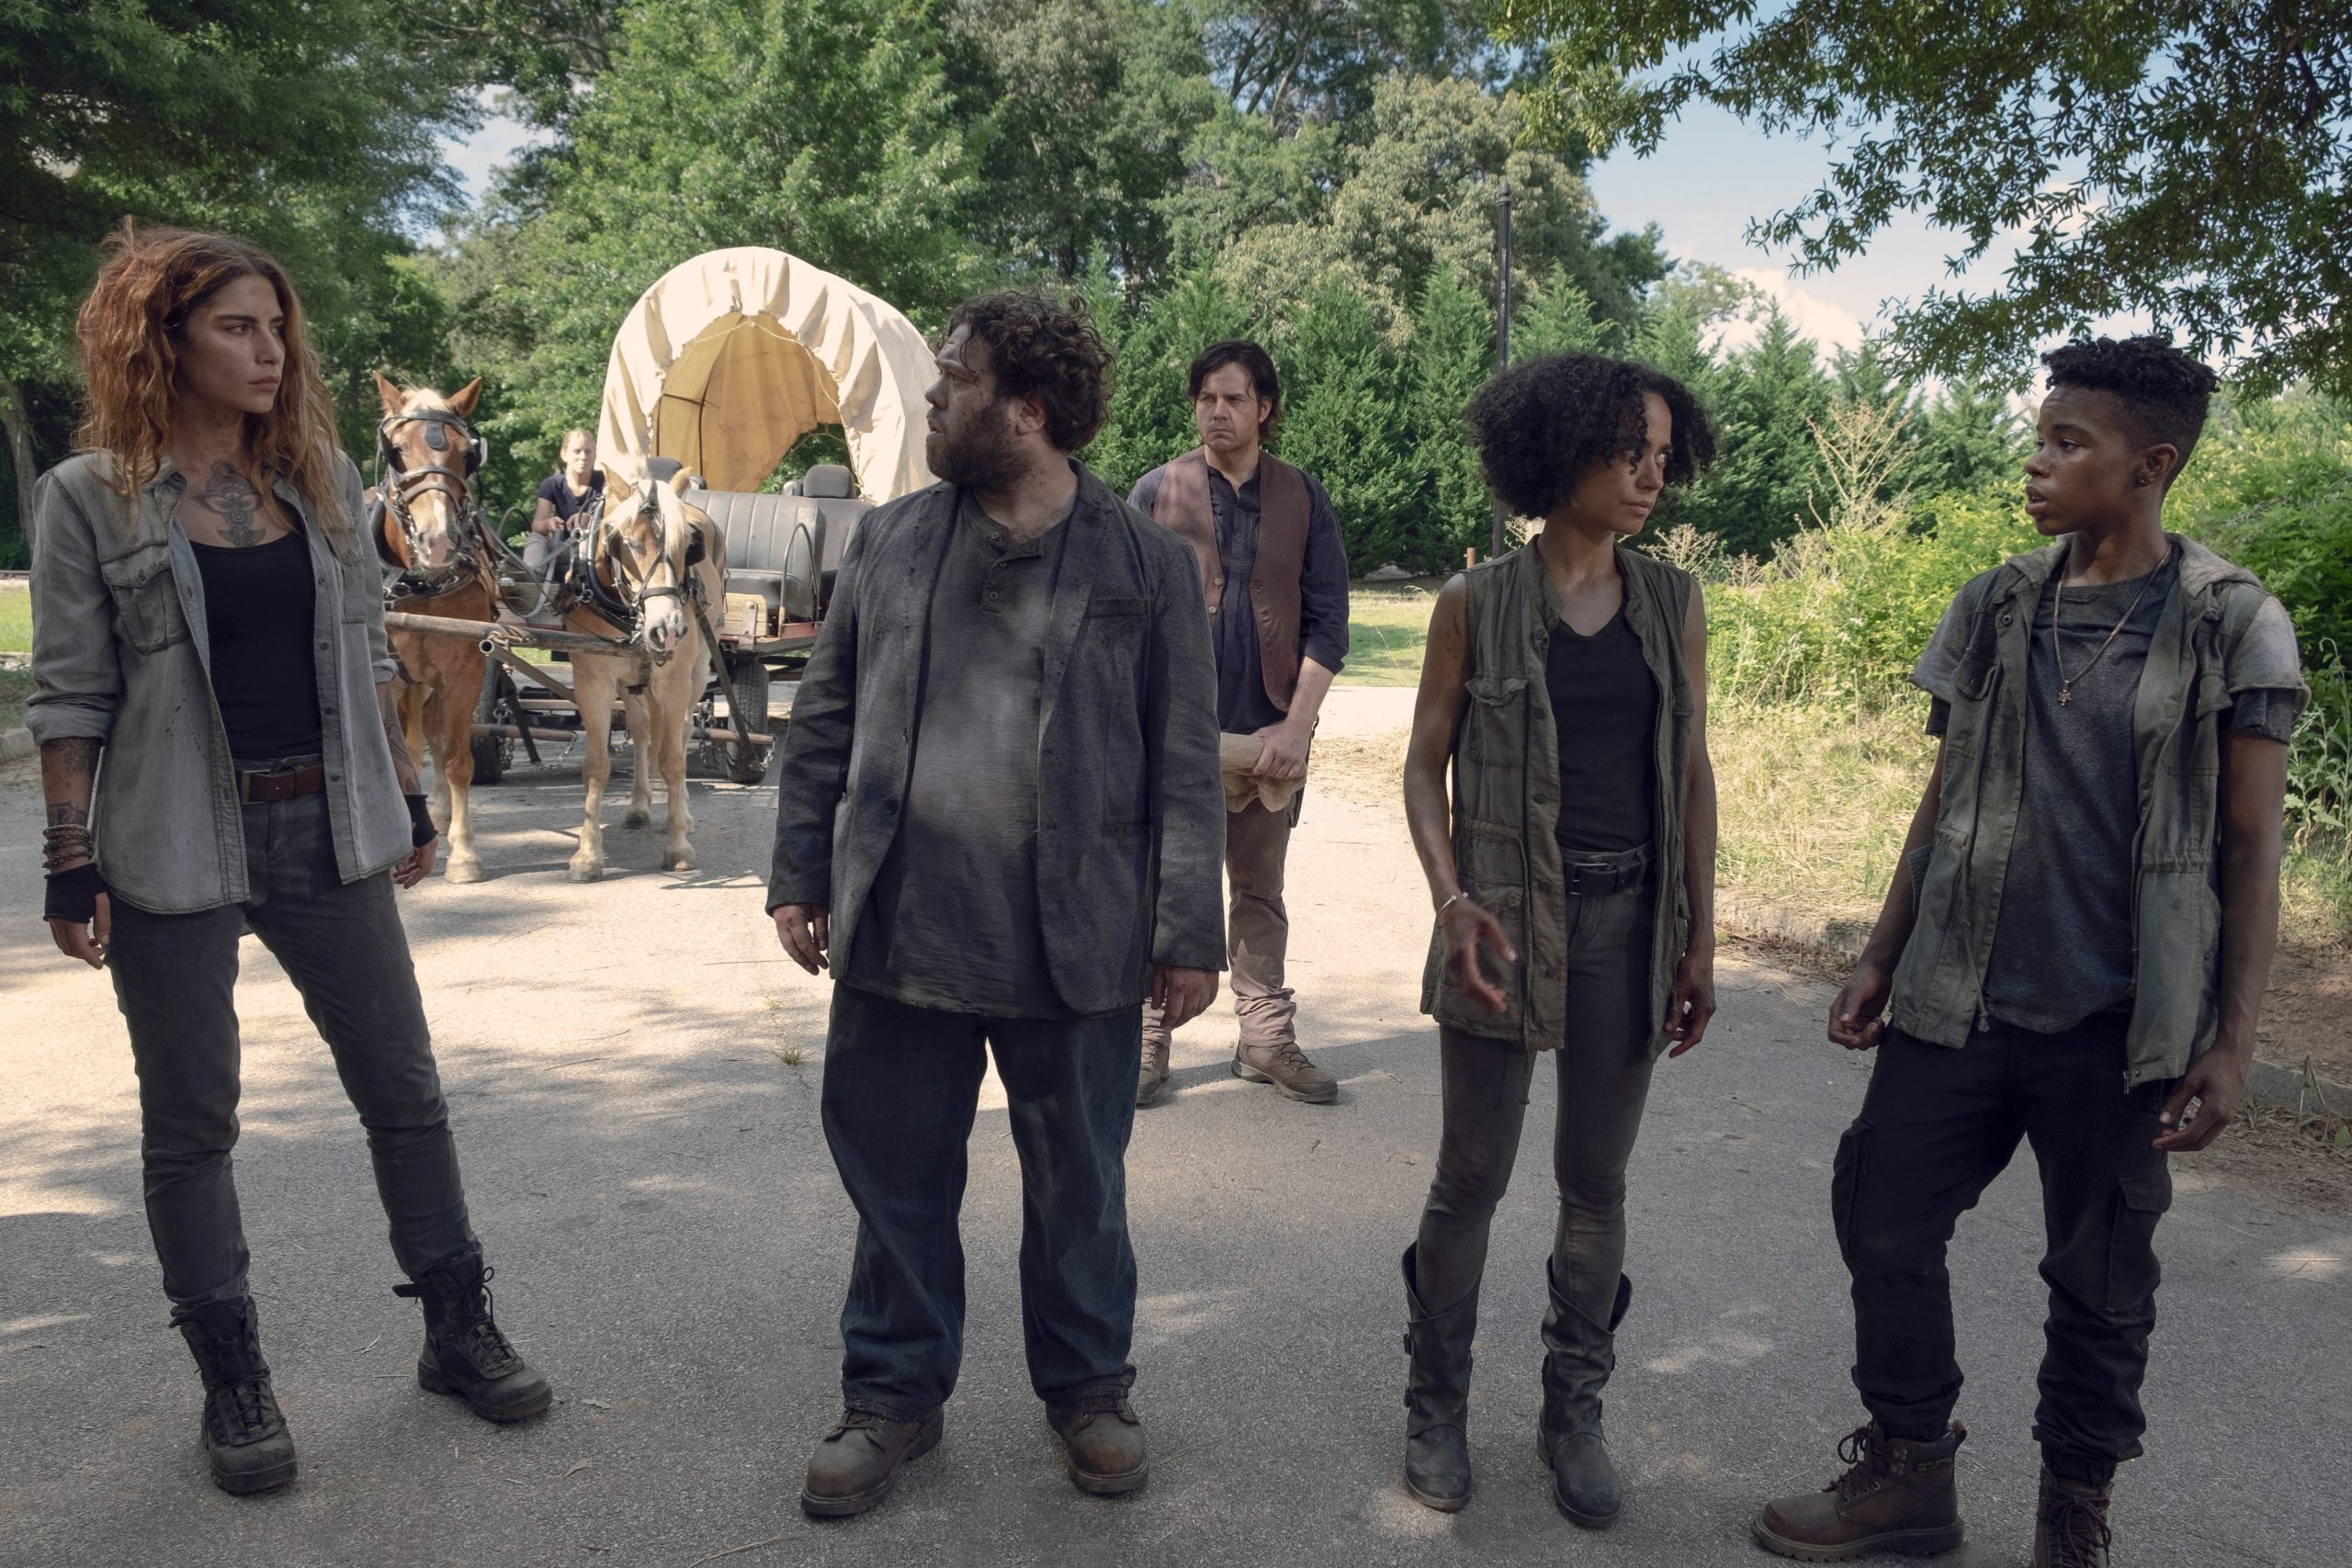 Magna, Luke, Connie, and Kelly twd 906